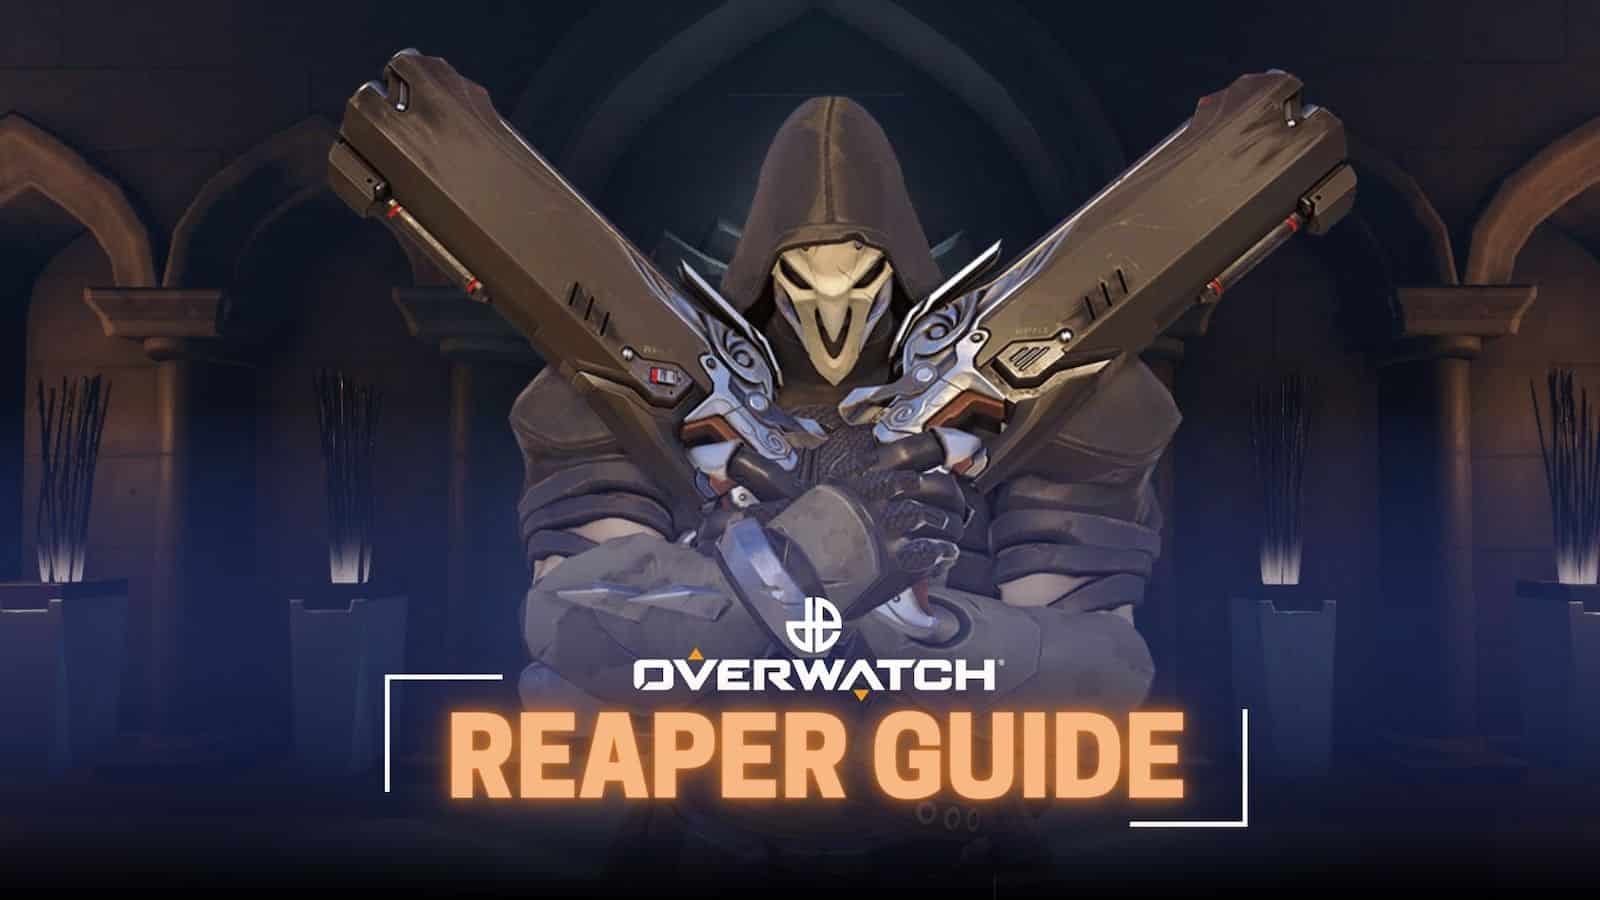 Overwatch 2: Reaper Guide (Tips, Abilities, And More)